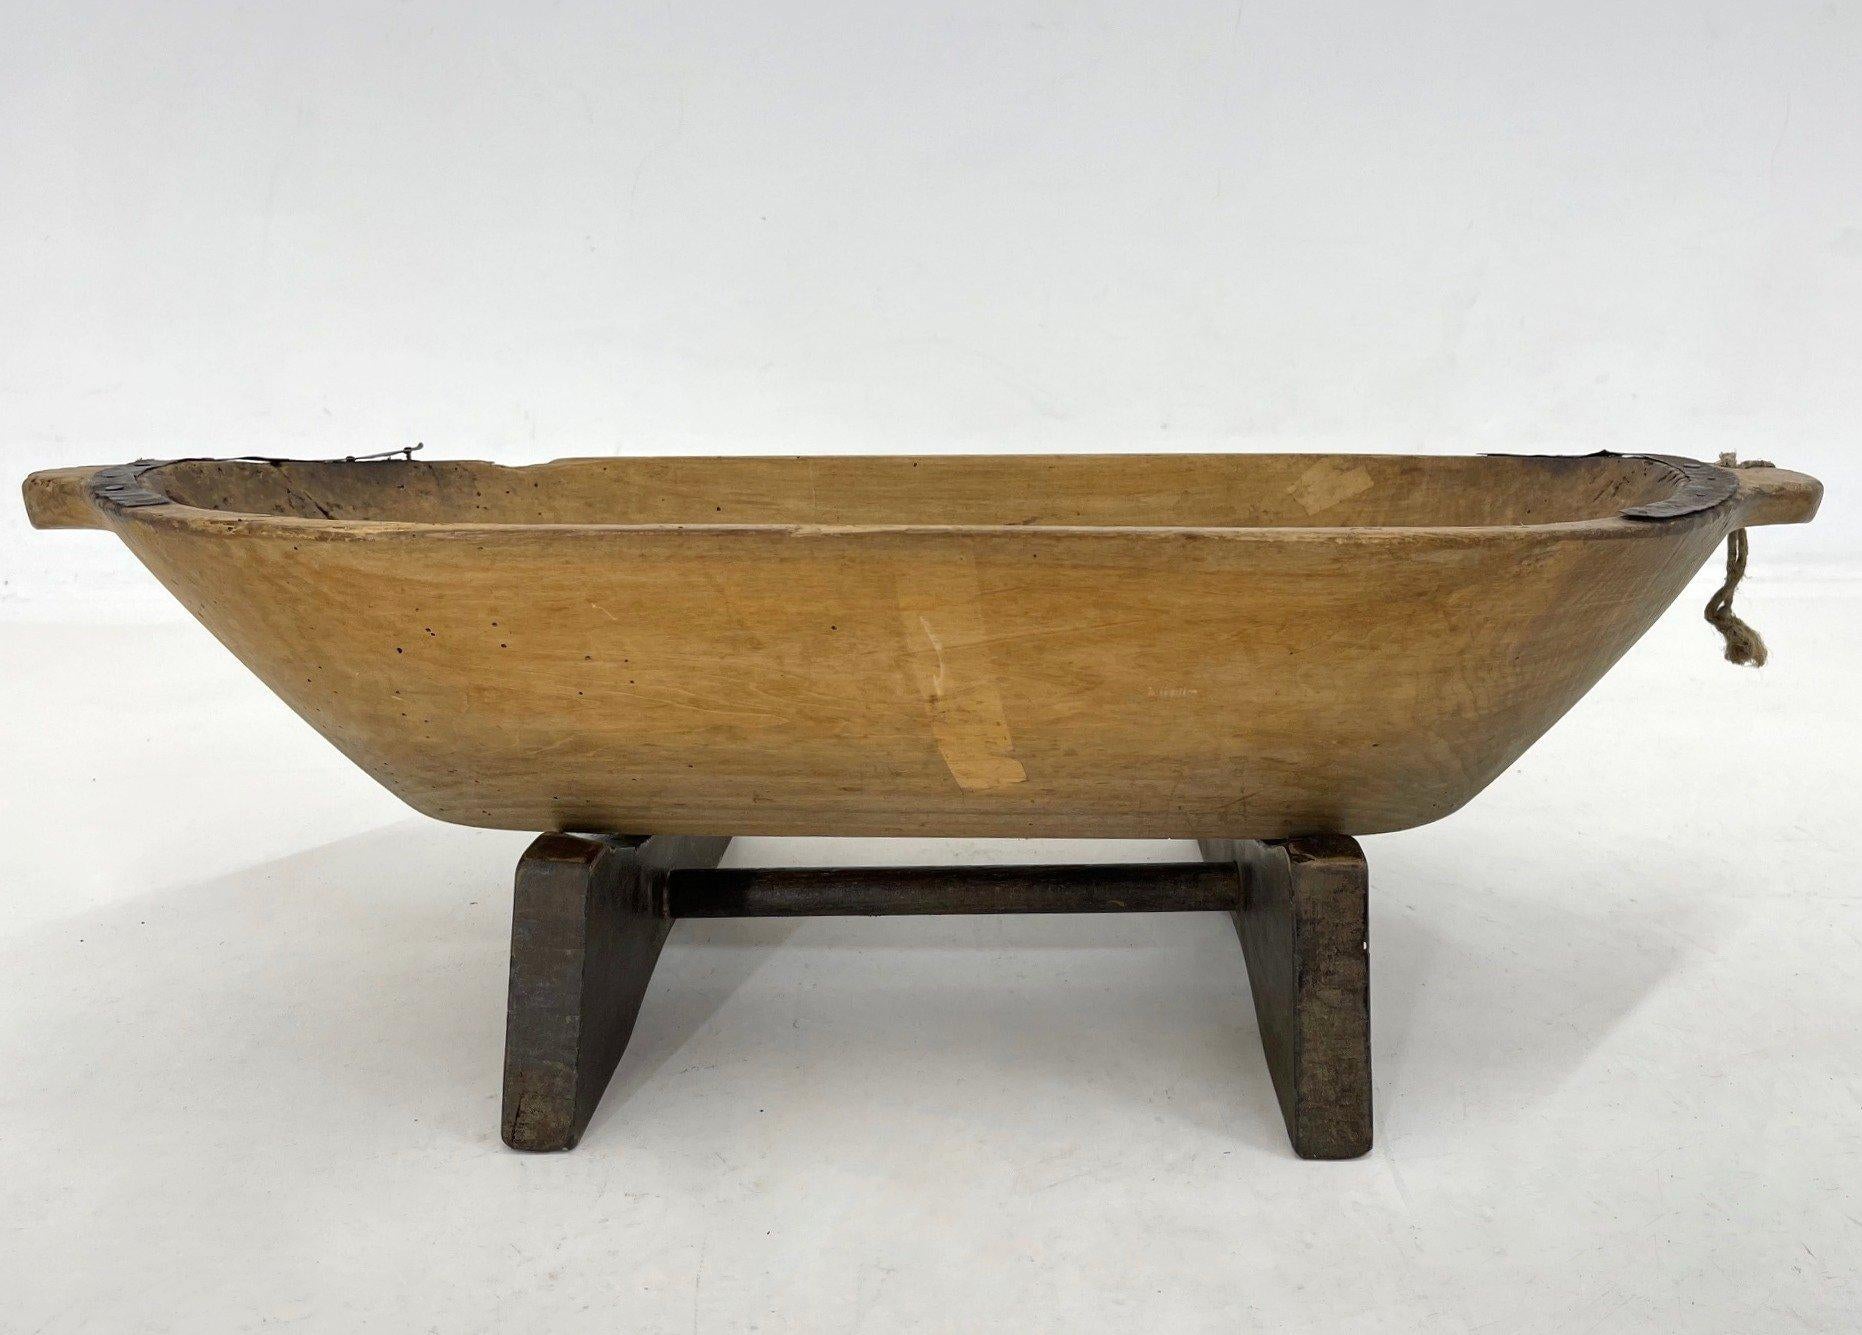 Antique wooden dough trough with metal details on original stand in unrestored, untreated original condition. A beautiful home decoration that can be used in many different ways. The hight without the stand is 13 cm.